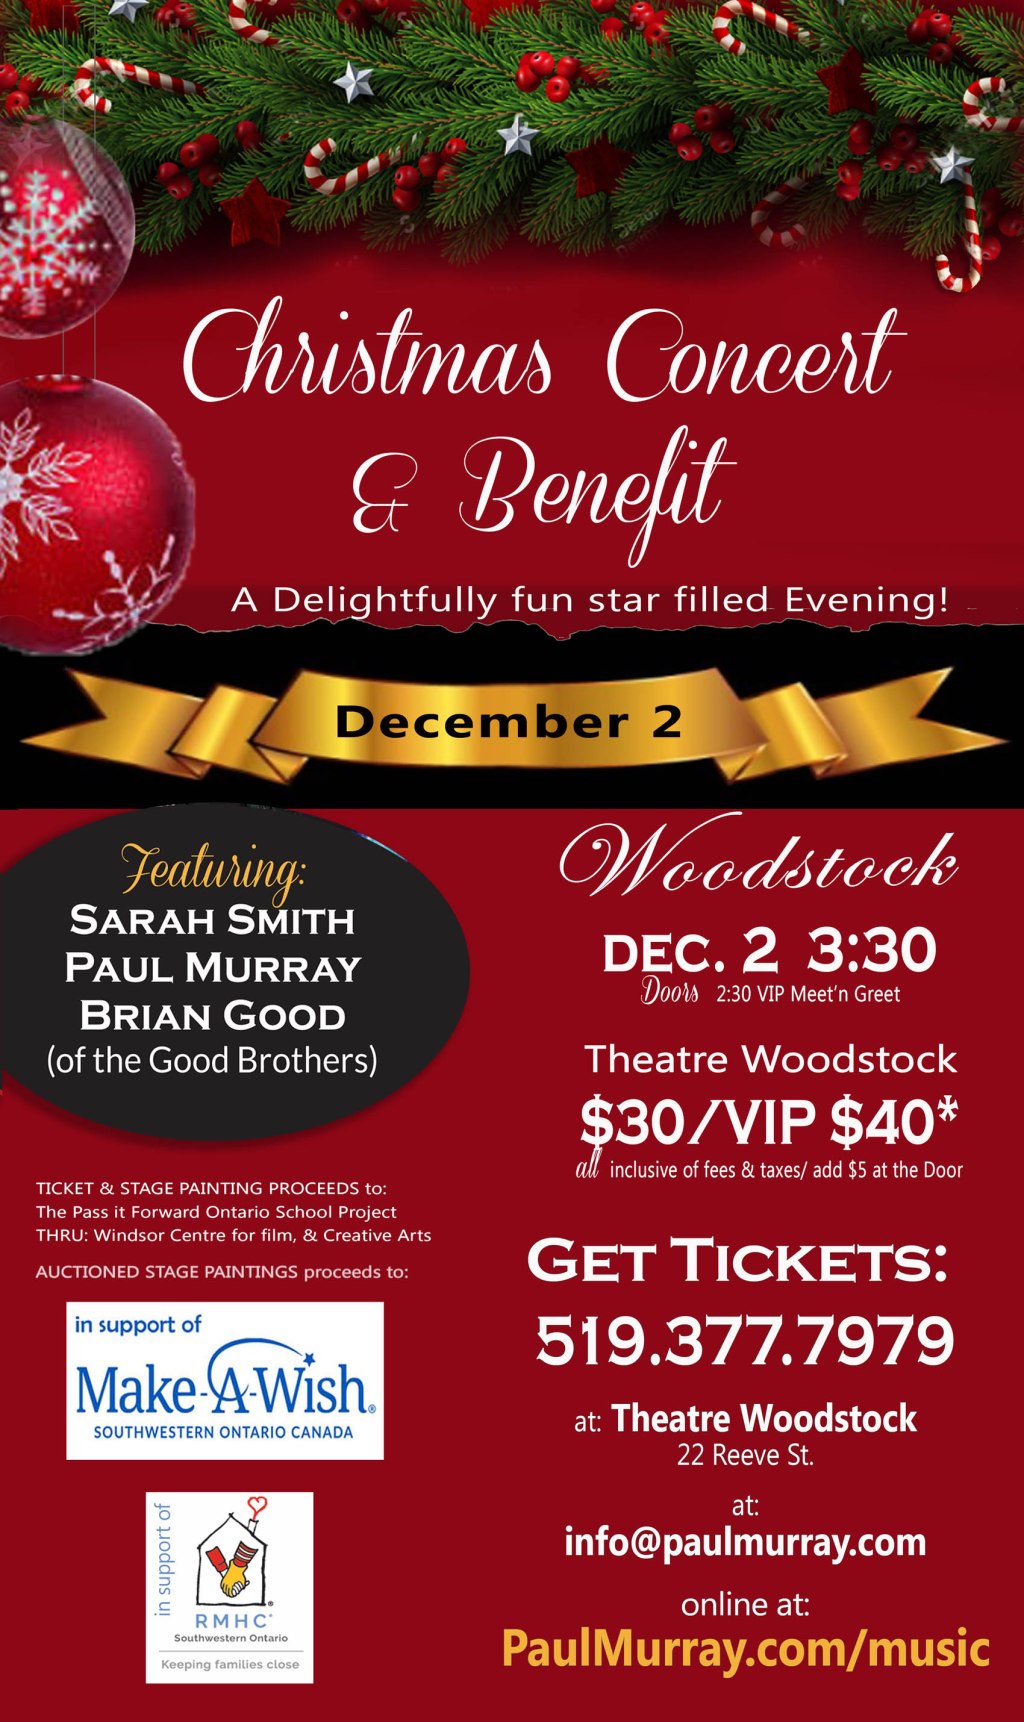 Music N Arts Collide Christmas Concert Benefit Country 104